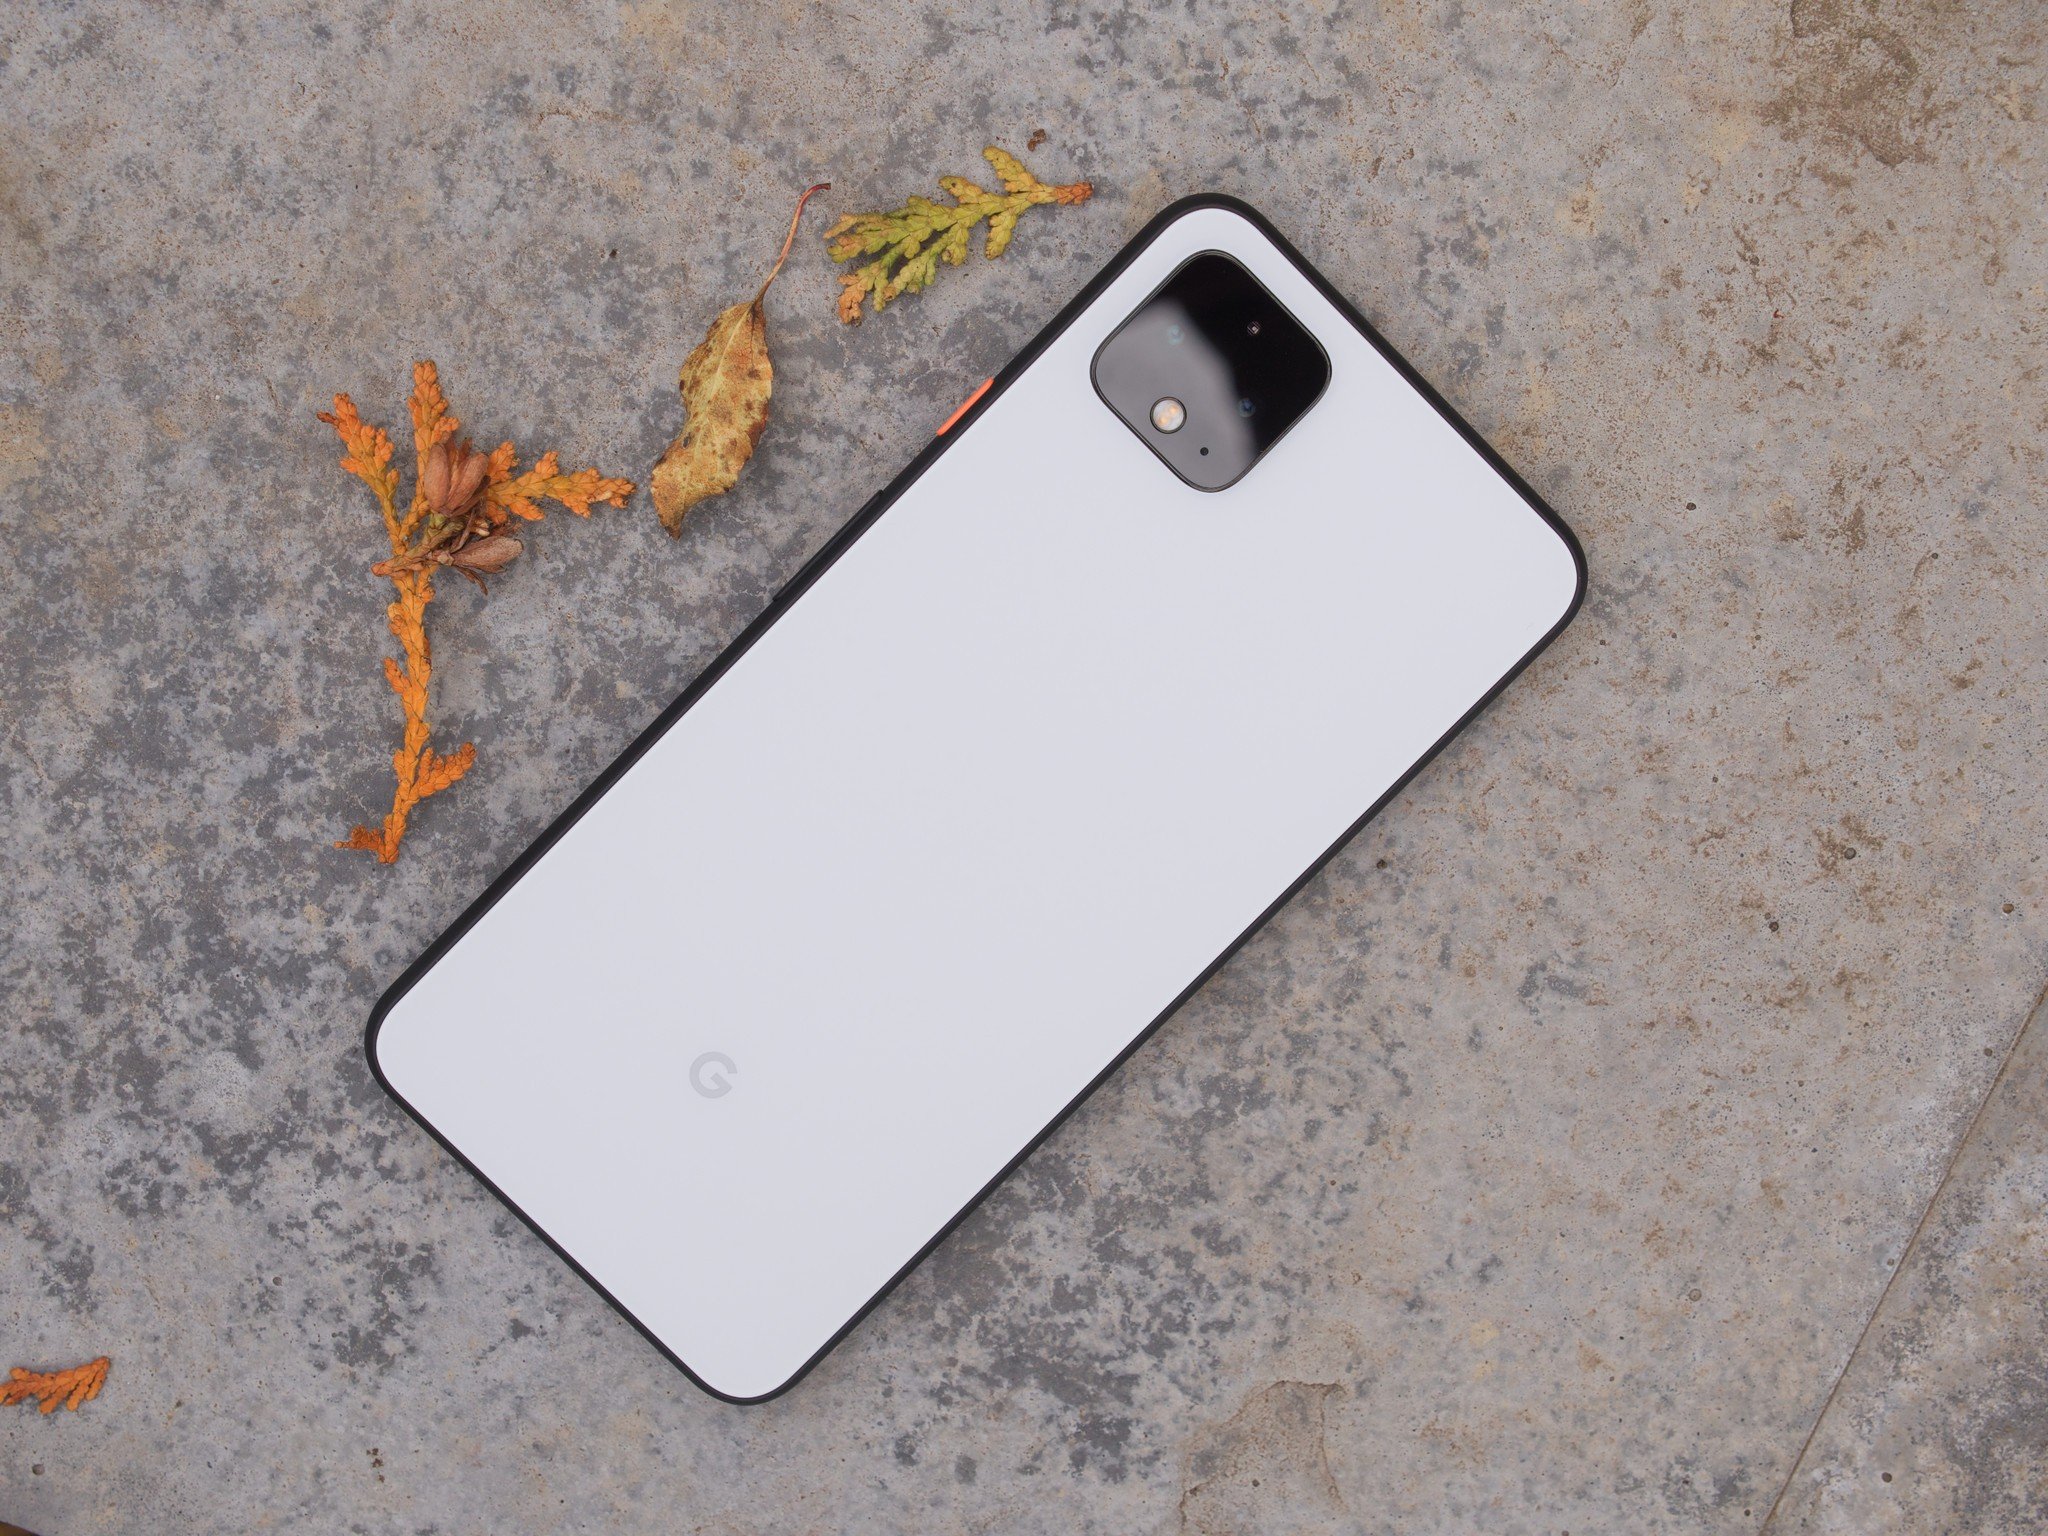 Google Pixel 4 XL in Clearly White